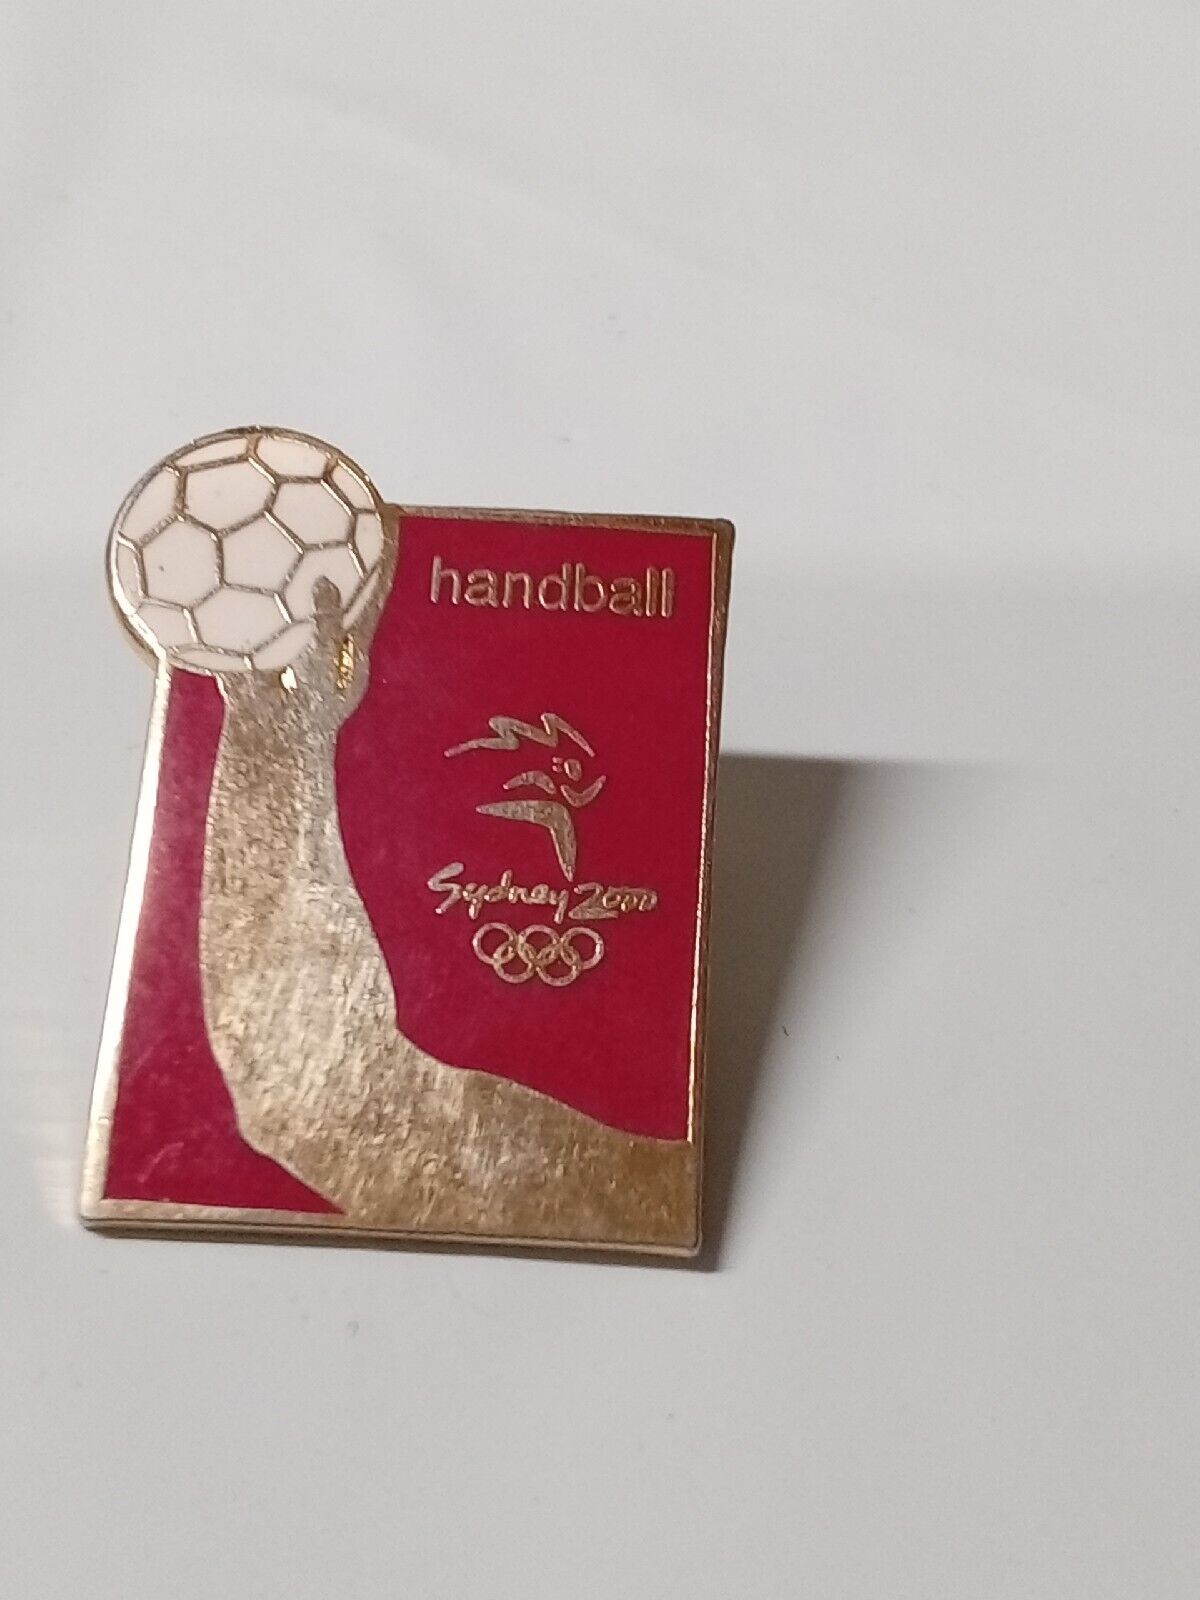 Sydney 2000 Olympic Licensed Collectible Lapel Pin Handball 